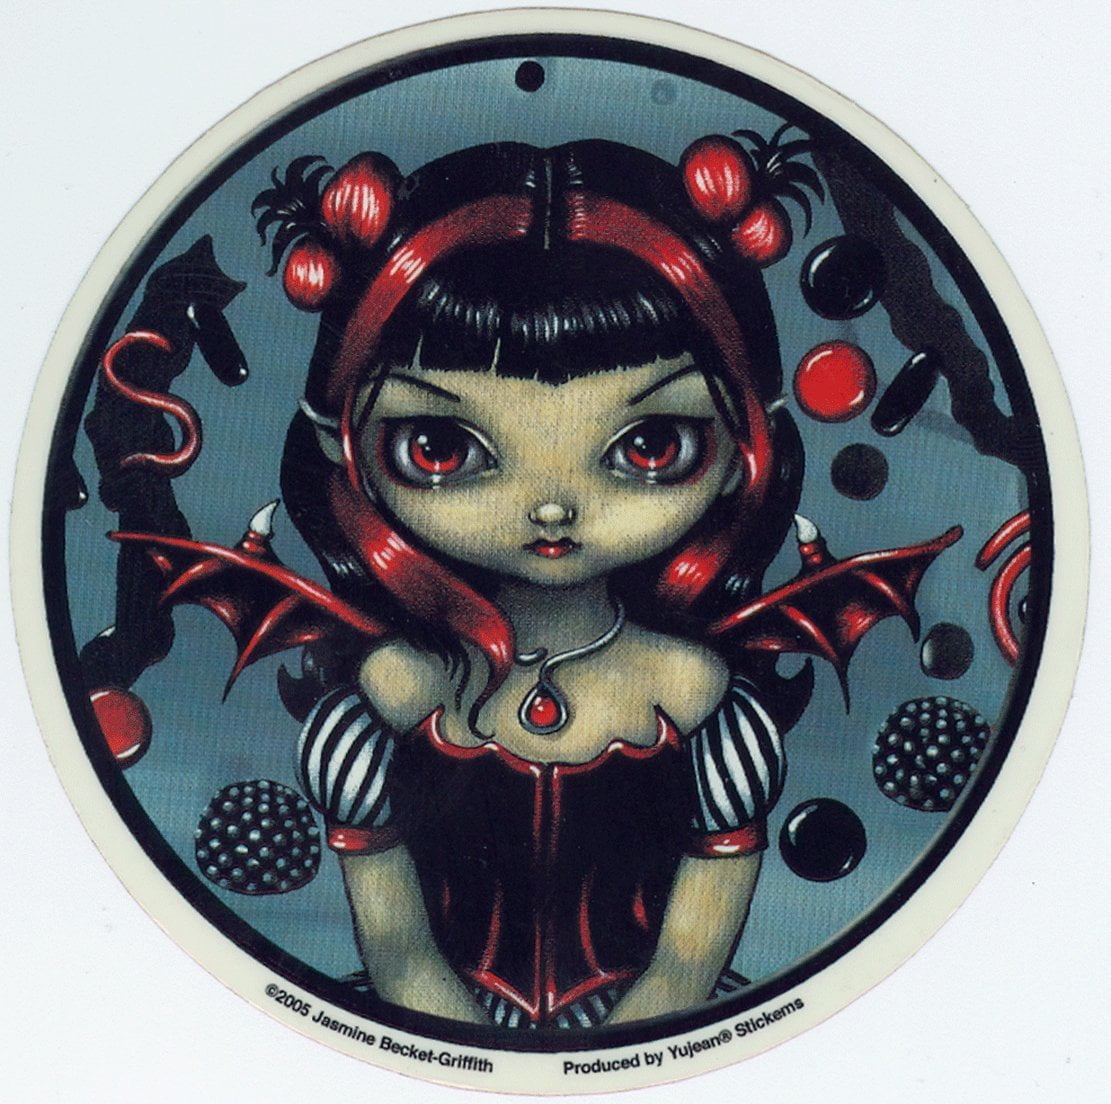 Yujean 'Jasmines Licorice Fairy' Decal/Sticker on Crystal Clear Backing. 